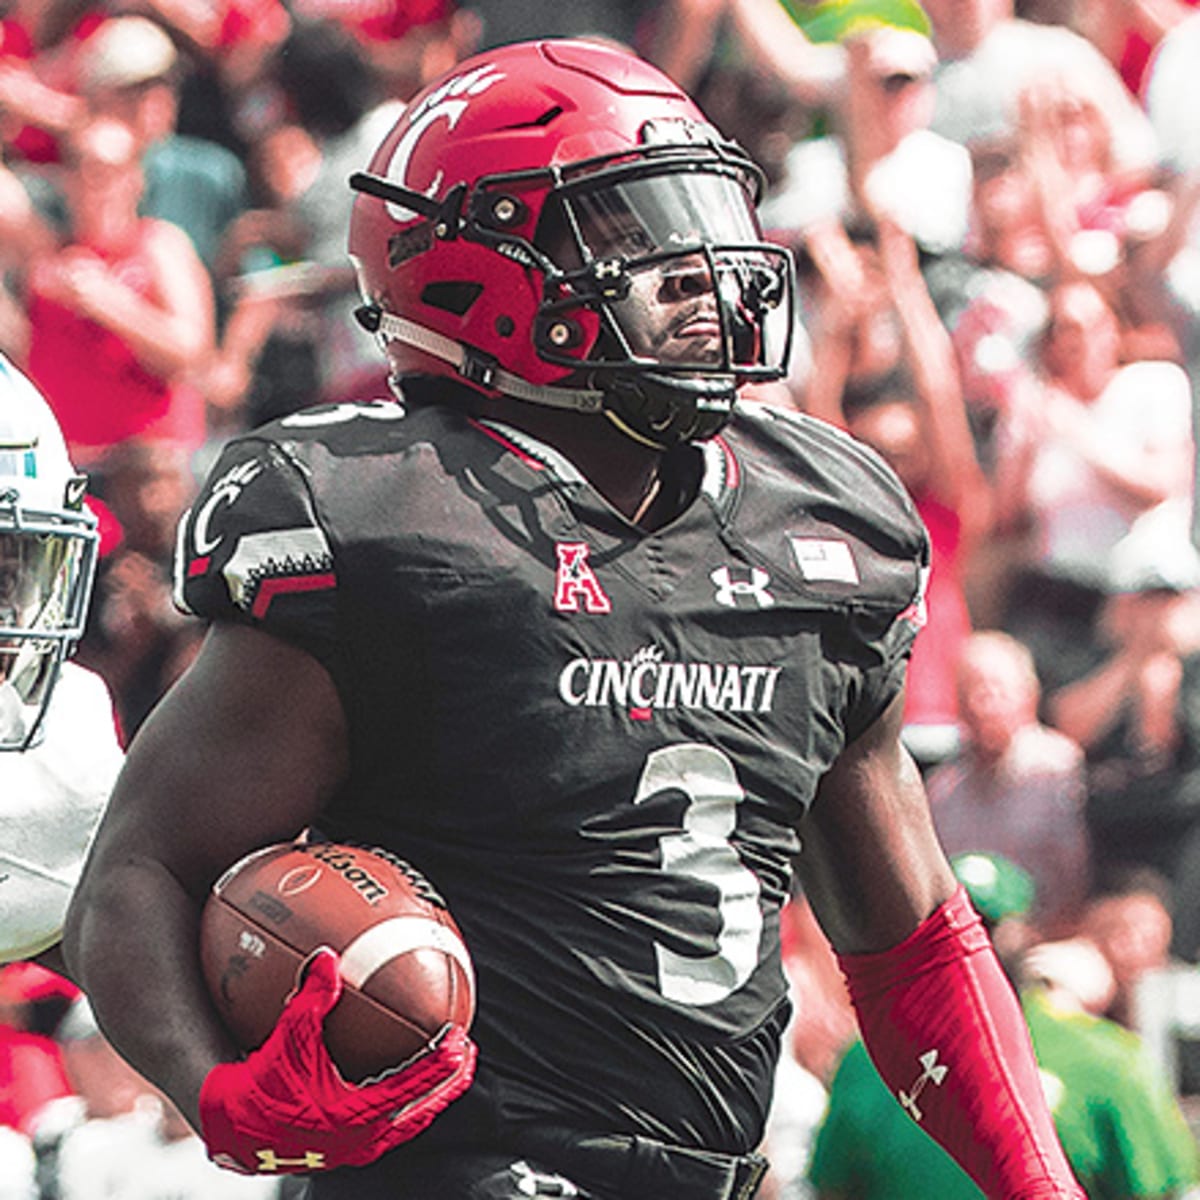 UC Bearcats: Wideout Kahlil Lewis is No. 1, in more ways than one